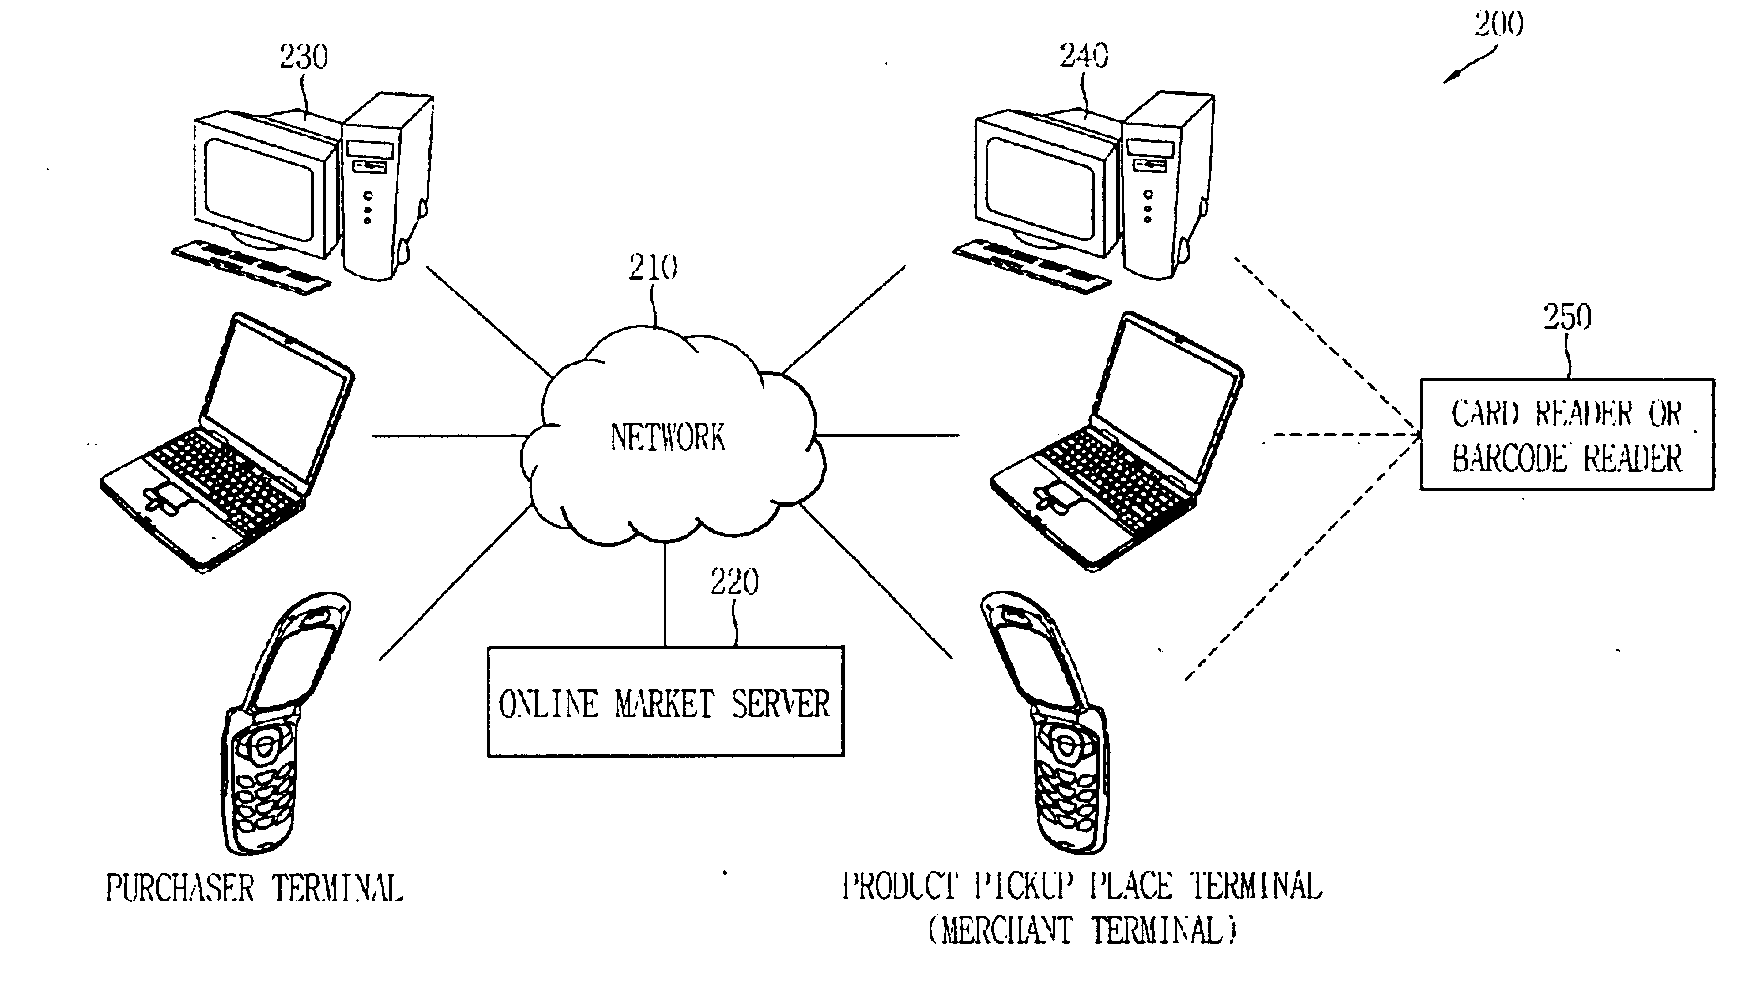 Method and System for Managing On-Line Market with Direct Receipt Delivery Option of Purchased Merchandise